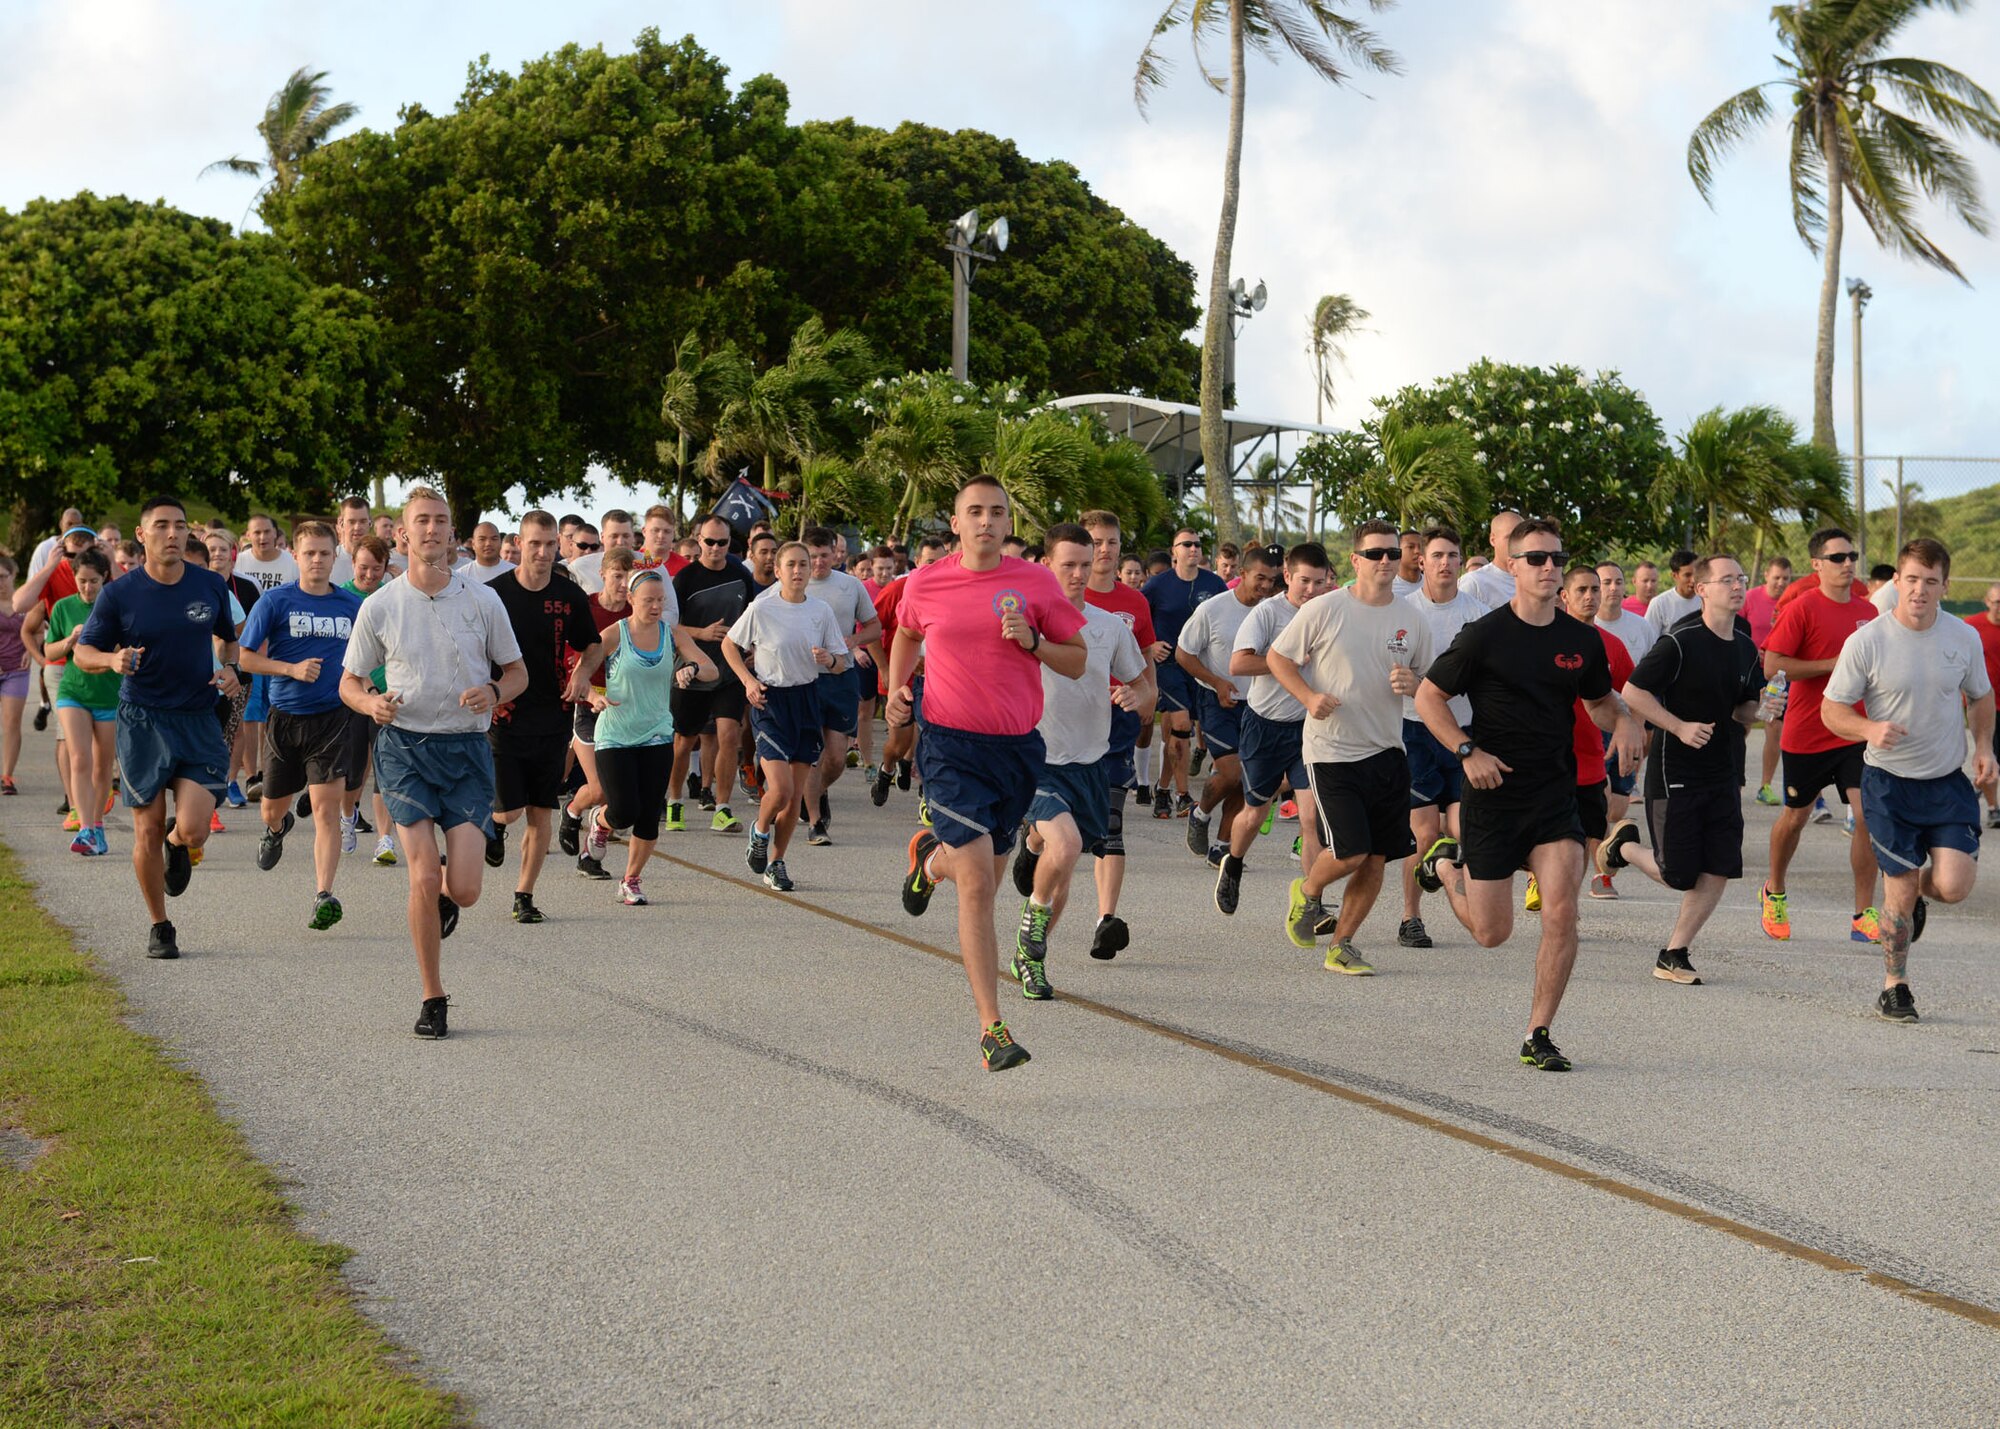 Contestants begin the Cinco De Mayo 5K hosted by the Coral Reef Fitness Center team May 5, 2015, at Andersen Air Force Base, Guam. The fastest runner finished with a time of 19:12. The date is observed to commemorate the Mexican army's victory over French forces at the Battle of Puebla on May 5, 1862. (U.S. Air Force photo by Airman 1st Class Joshua Smoot/Released)
